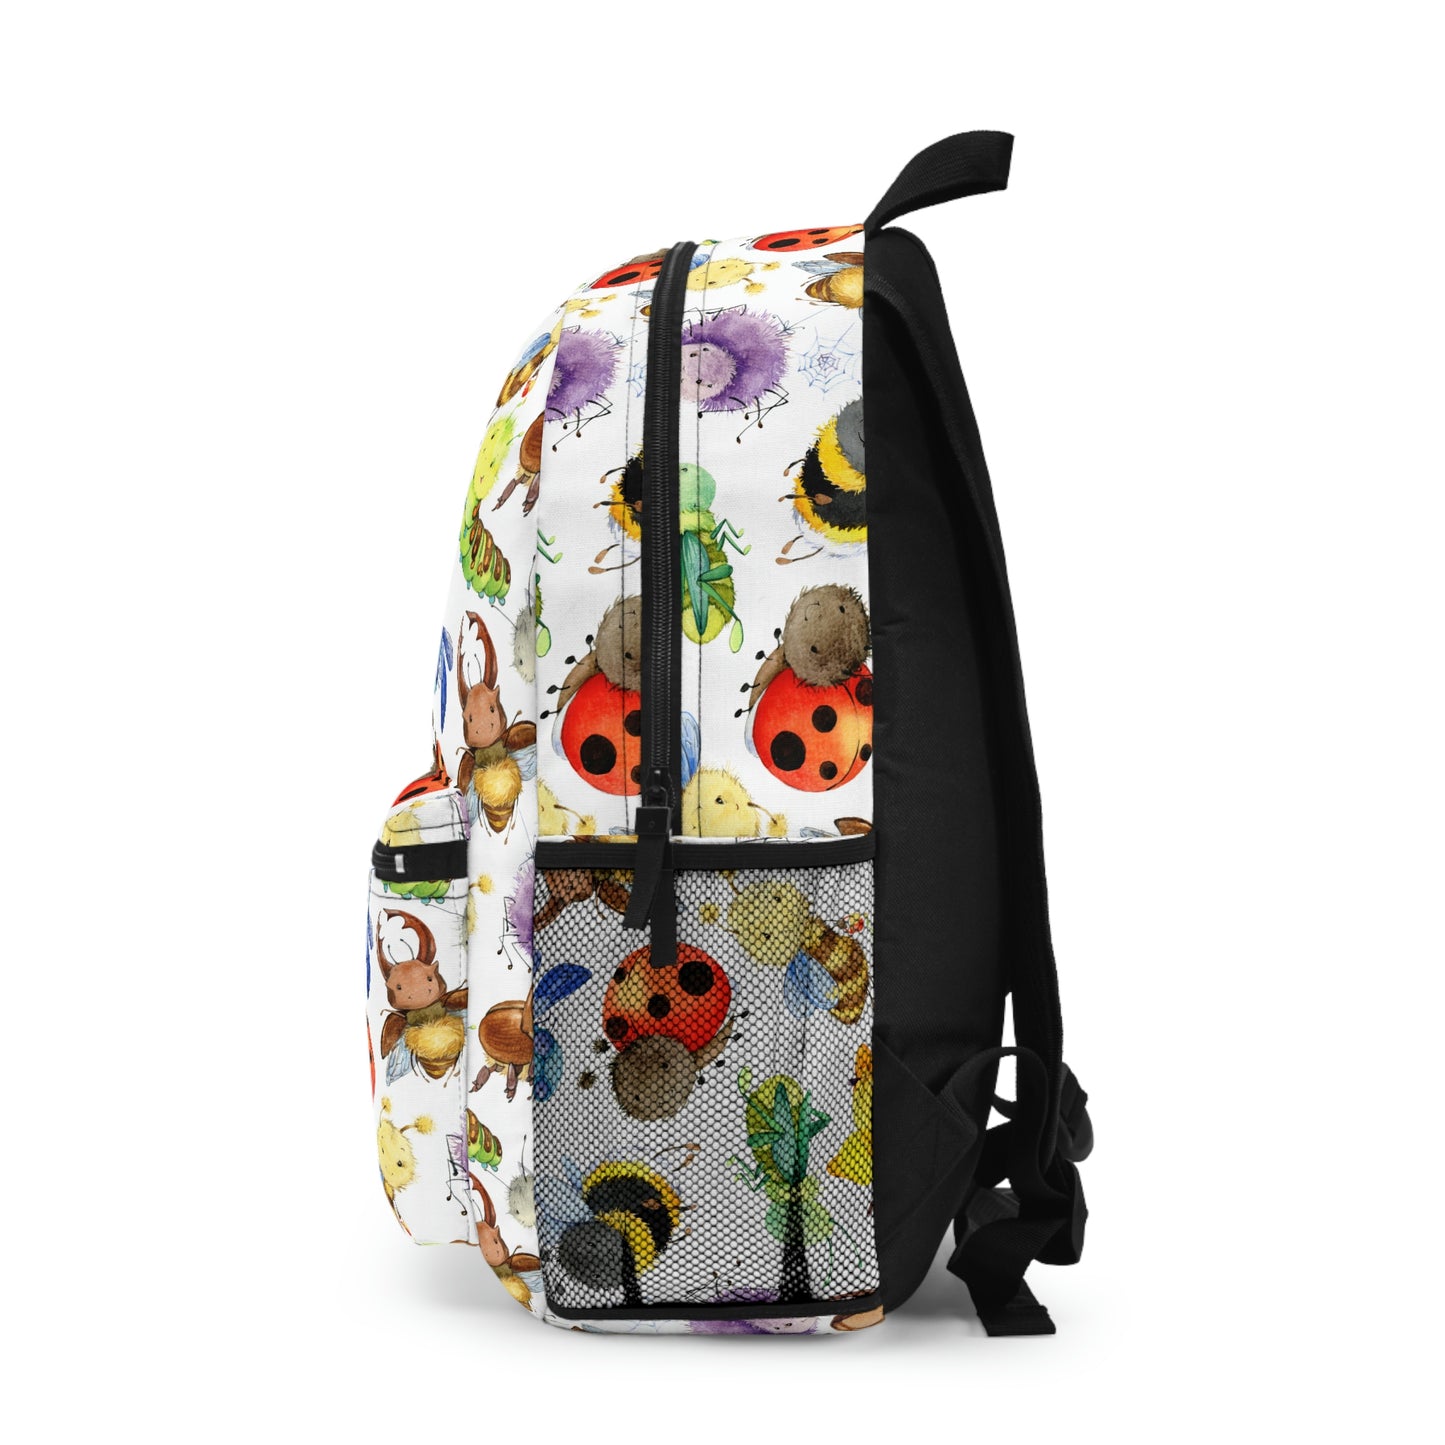 Ladybugs, Bees and Dragonflies Backpack